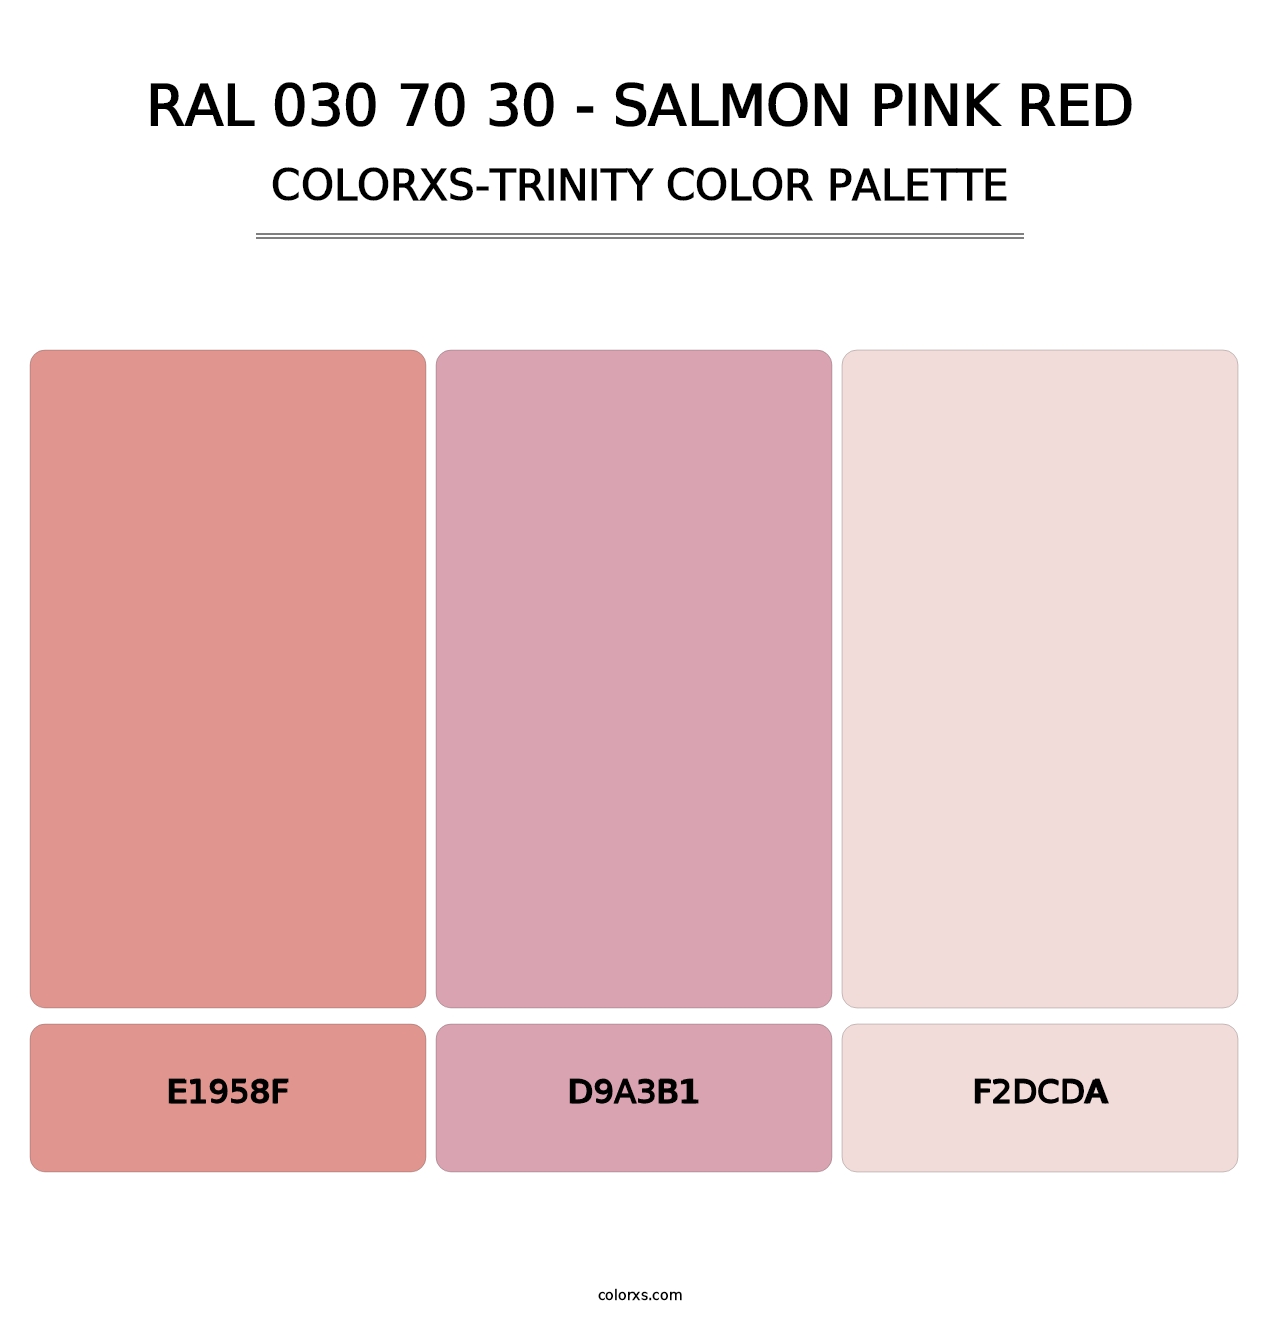 RAL 030 70 30 - Salmon Pink Red - Colorxs Trinity Palette